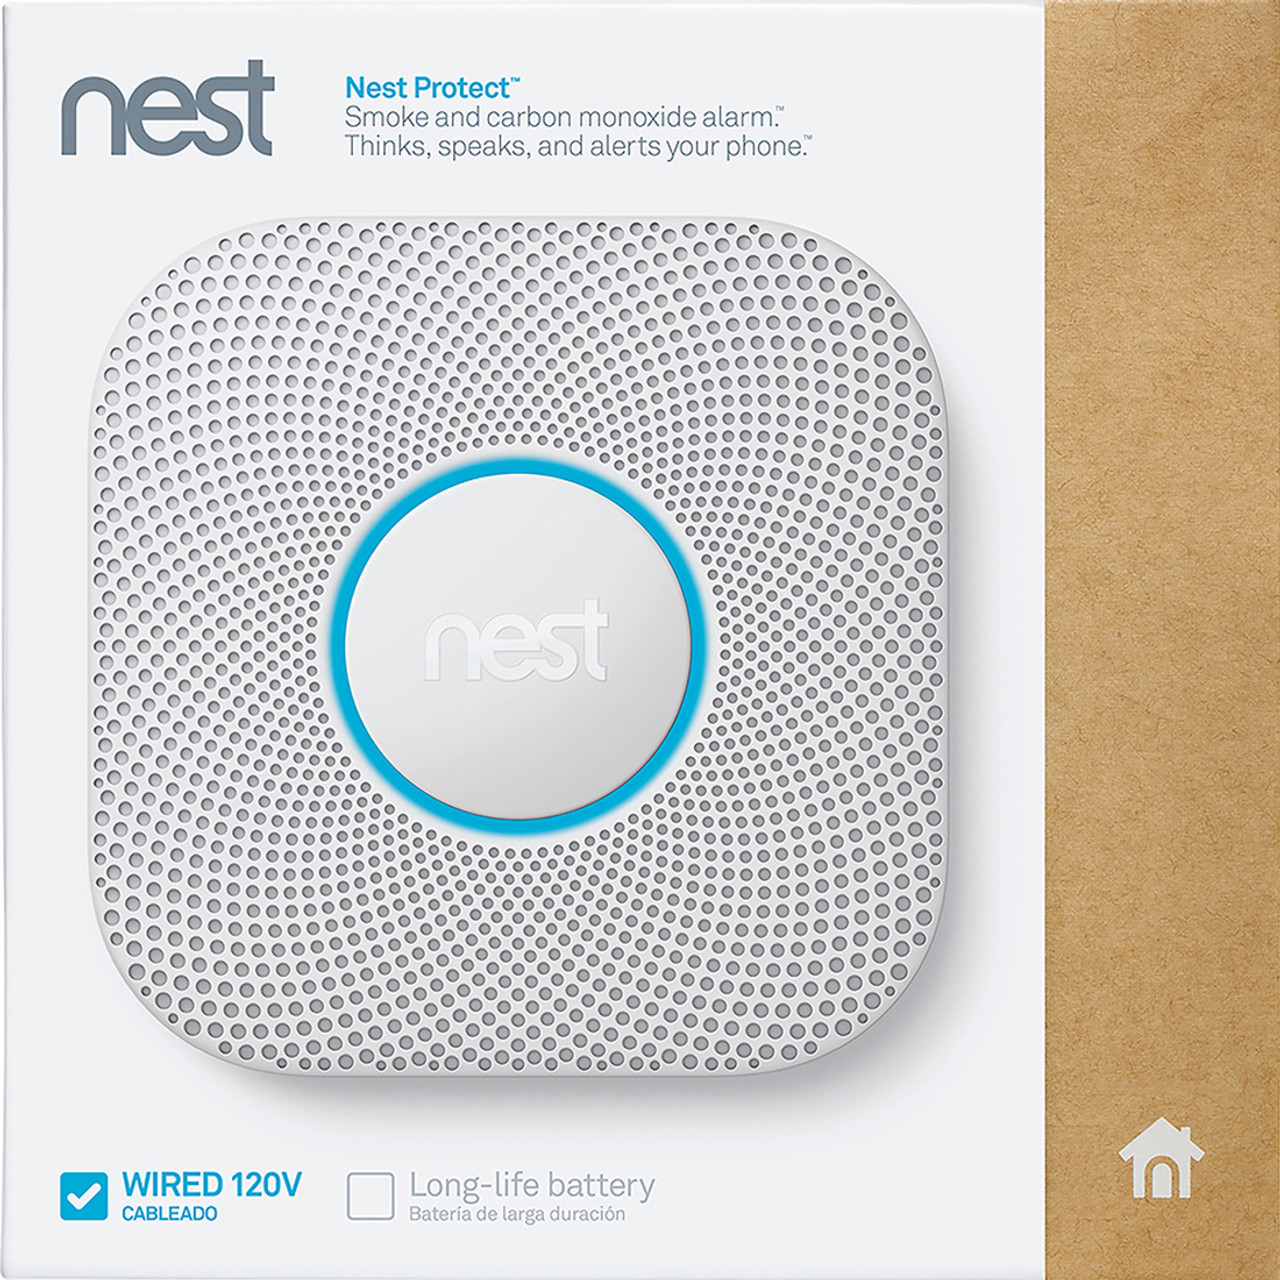 Google nest protect 2nd generation smoke+CO alarm,wired Missing Parts Read Description 